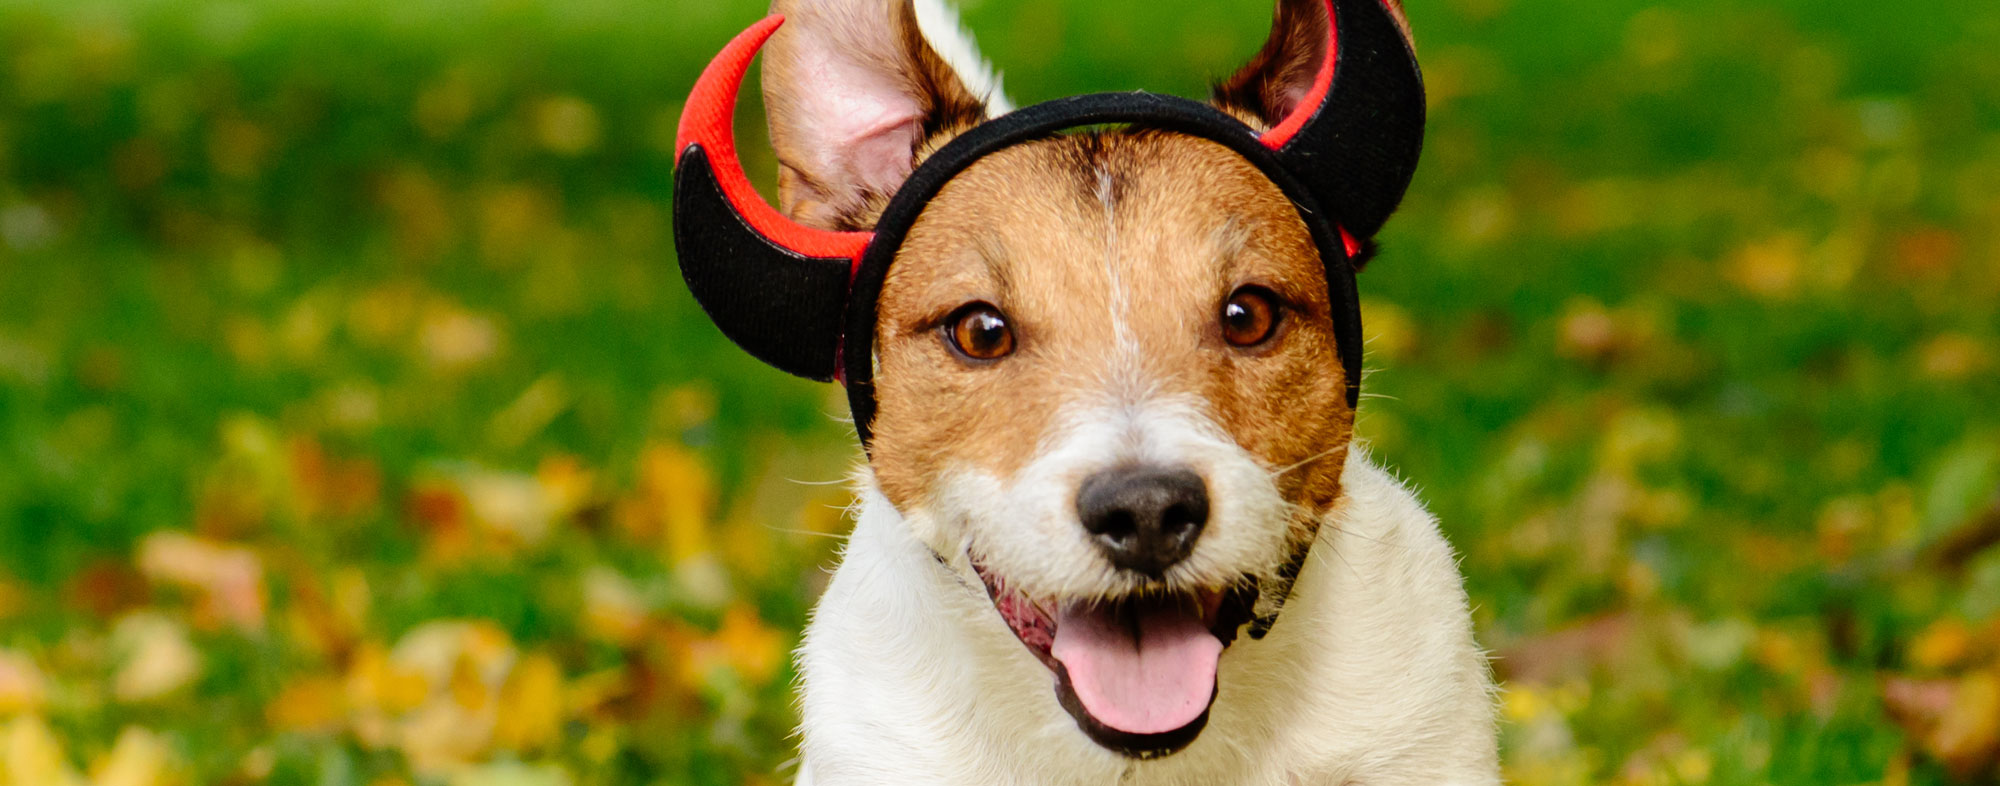 Dress your dog in a comfortable costume this Halloween